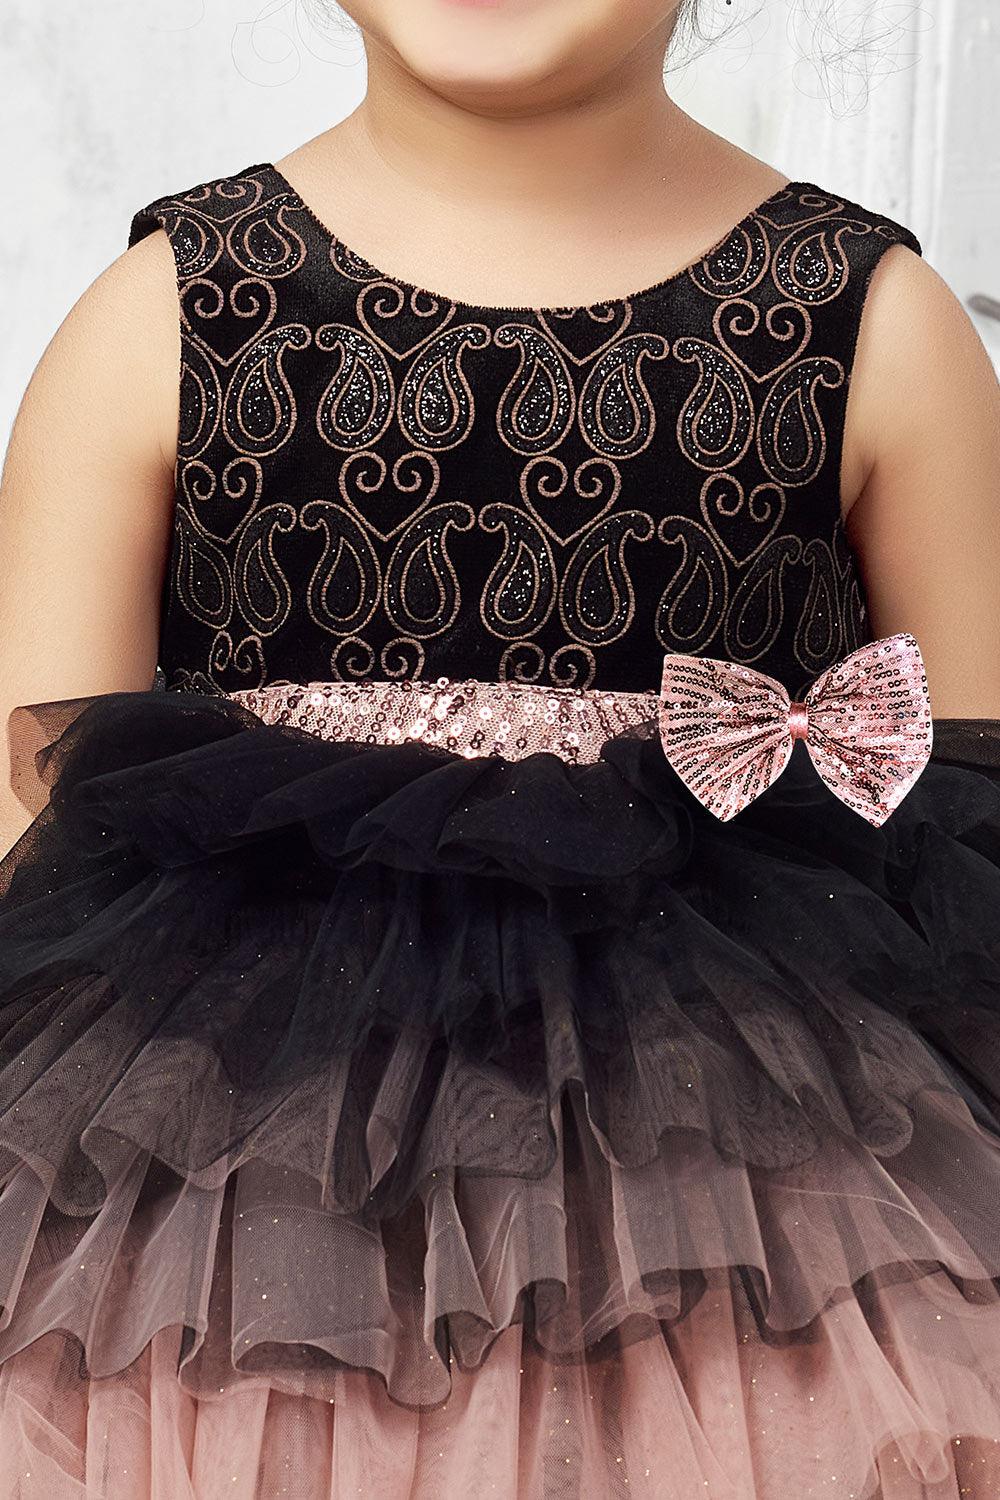 Multilayered frilled pink and black Ombre frock. - Lagorii Kids